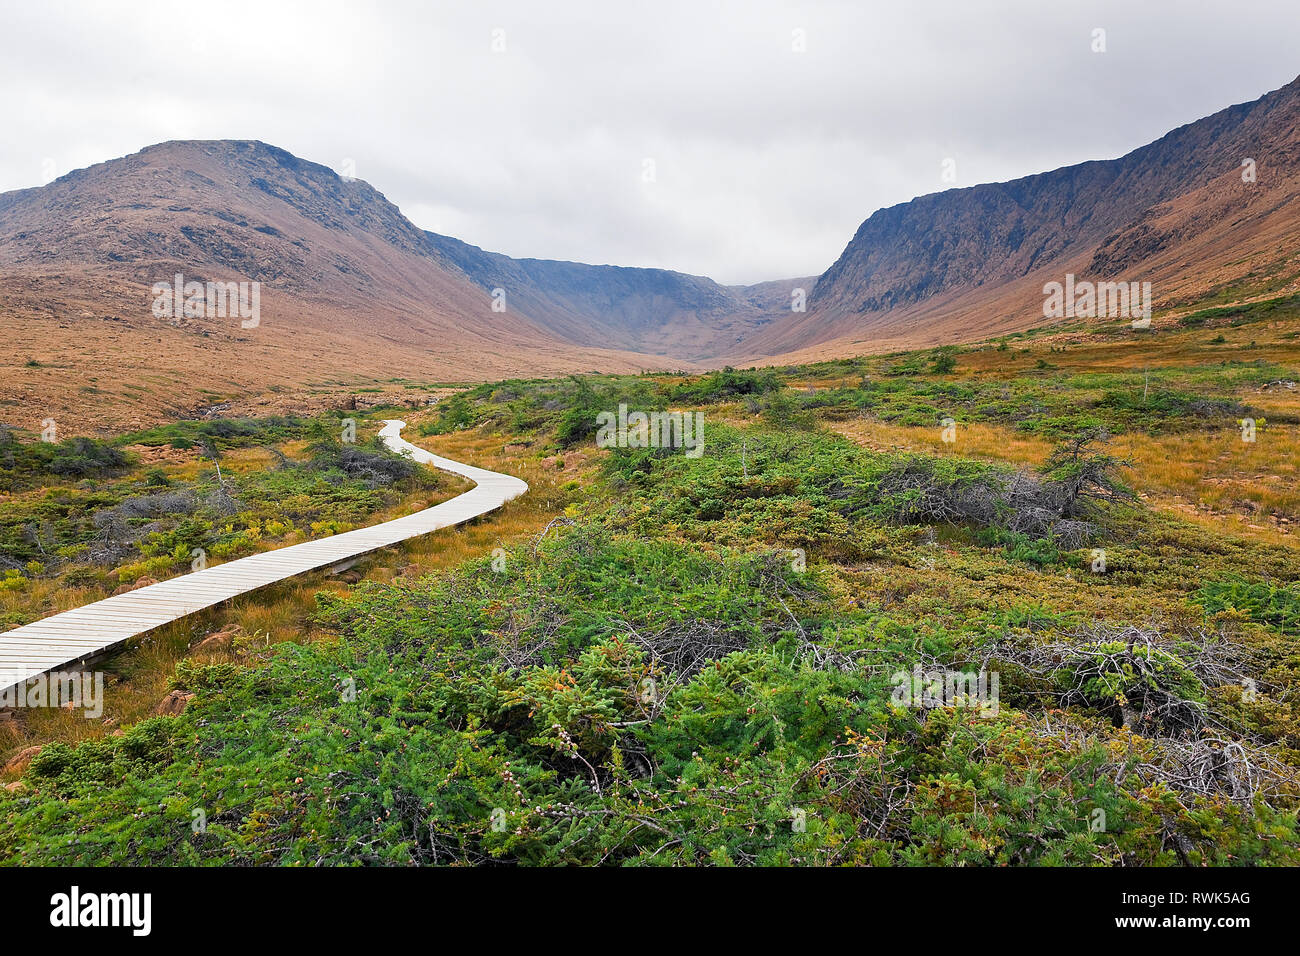 Section of the Tablelands Trail that is traversed on a wooden boardwalk because of the rugged terrain and to avoid damaging fragile plants species. In the background is the Winterhouse Brook Canyon. Gros Morne National Park, Newfoundland, Canada Stock Photo